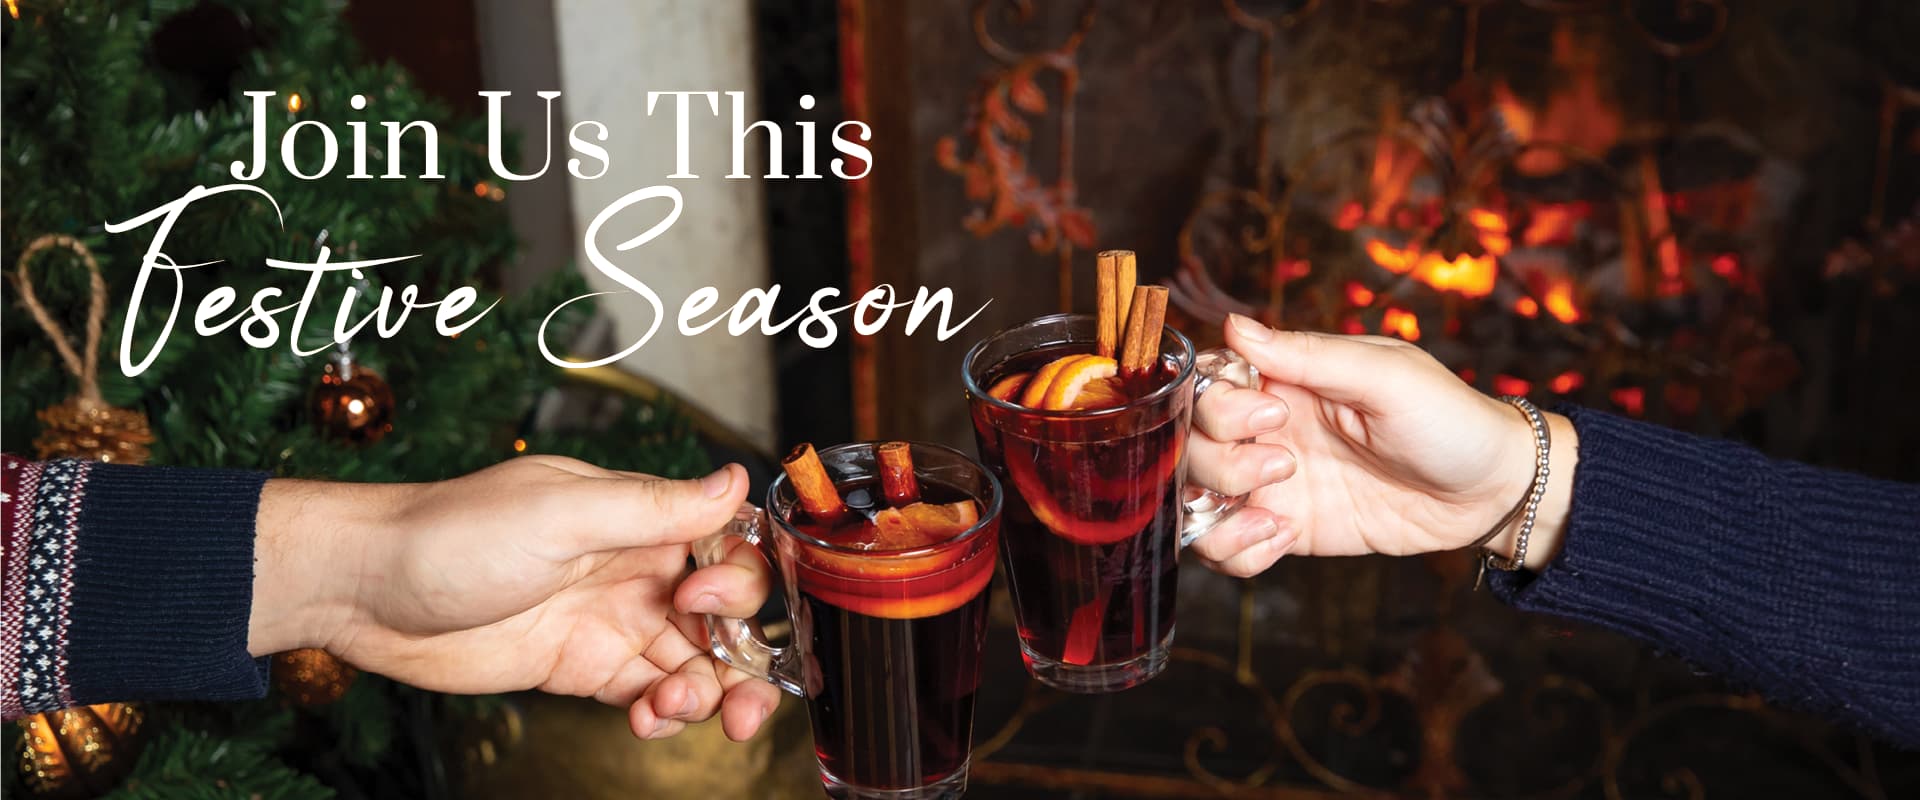 join us this festive season at The Horns Inn | Mulled Wine